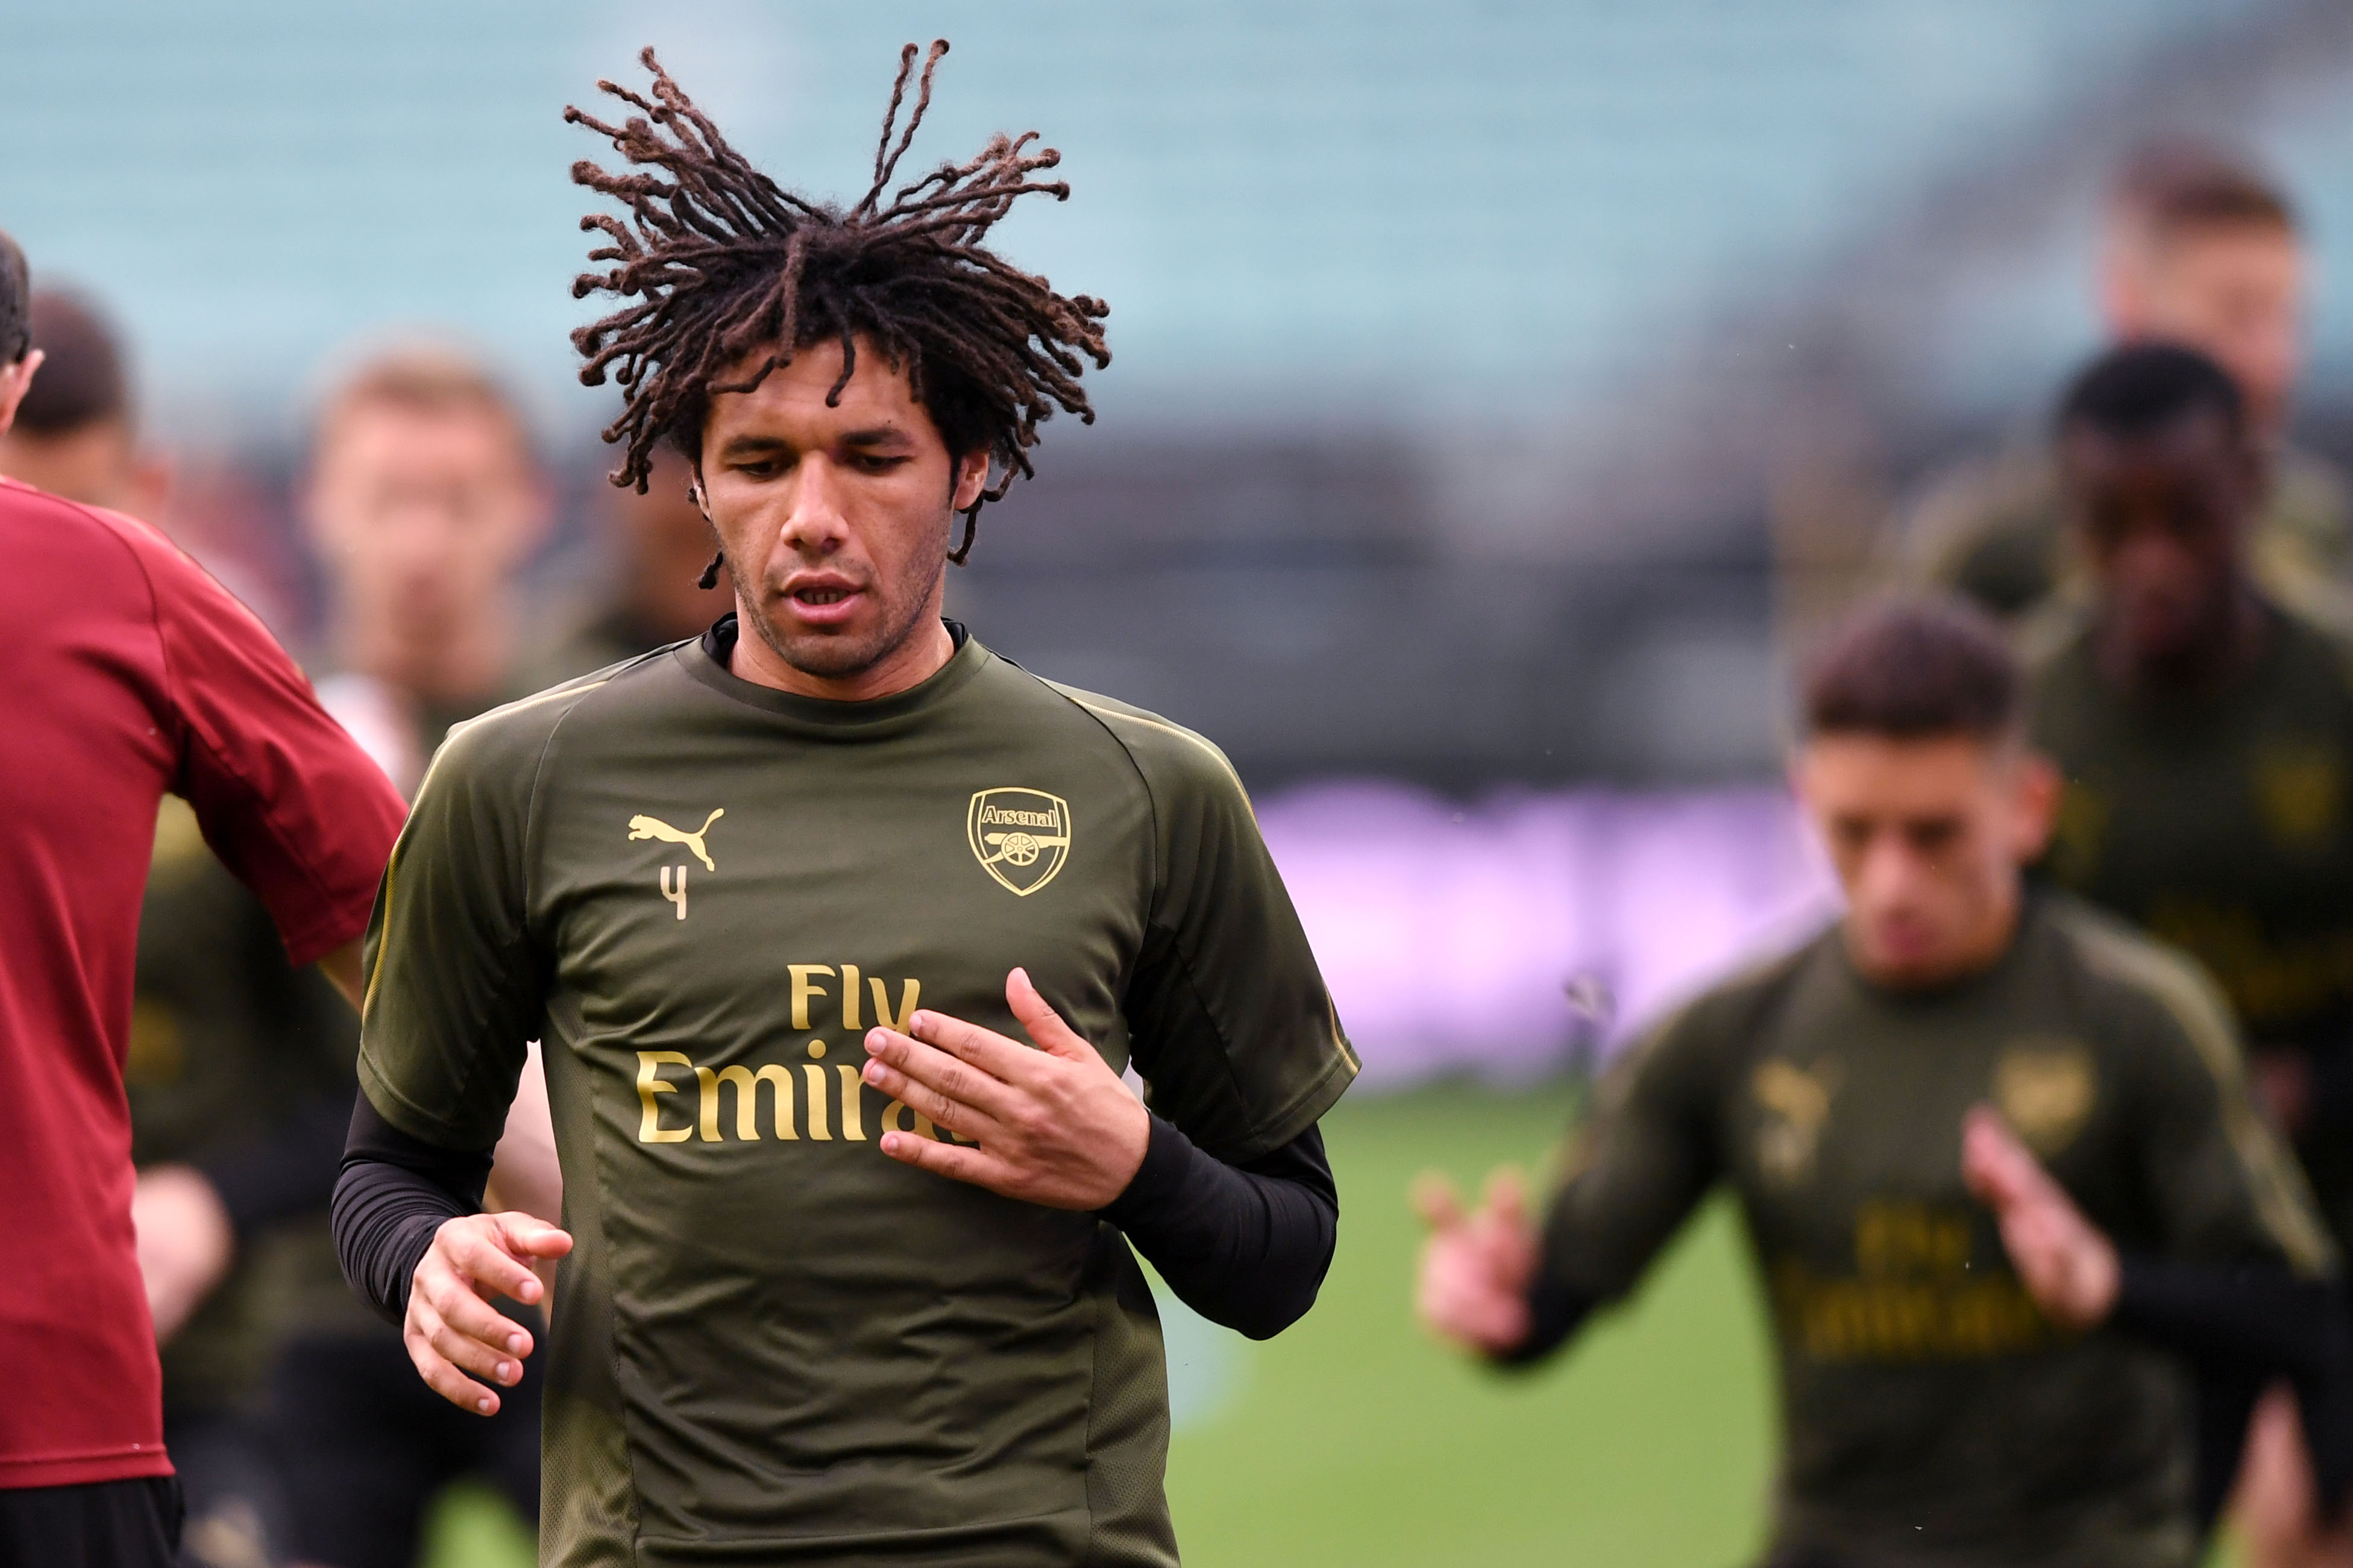 An Arsenal exit looms for Elneny? (Photo by Ozan Kose/AFP/Getty Images)